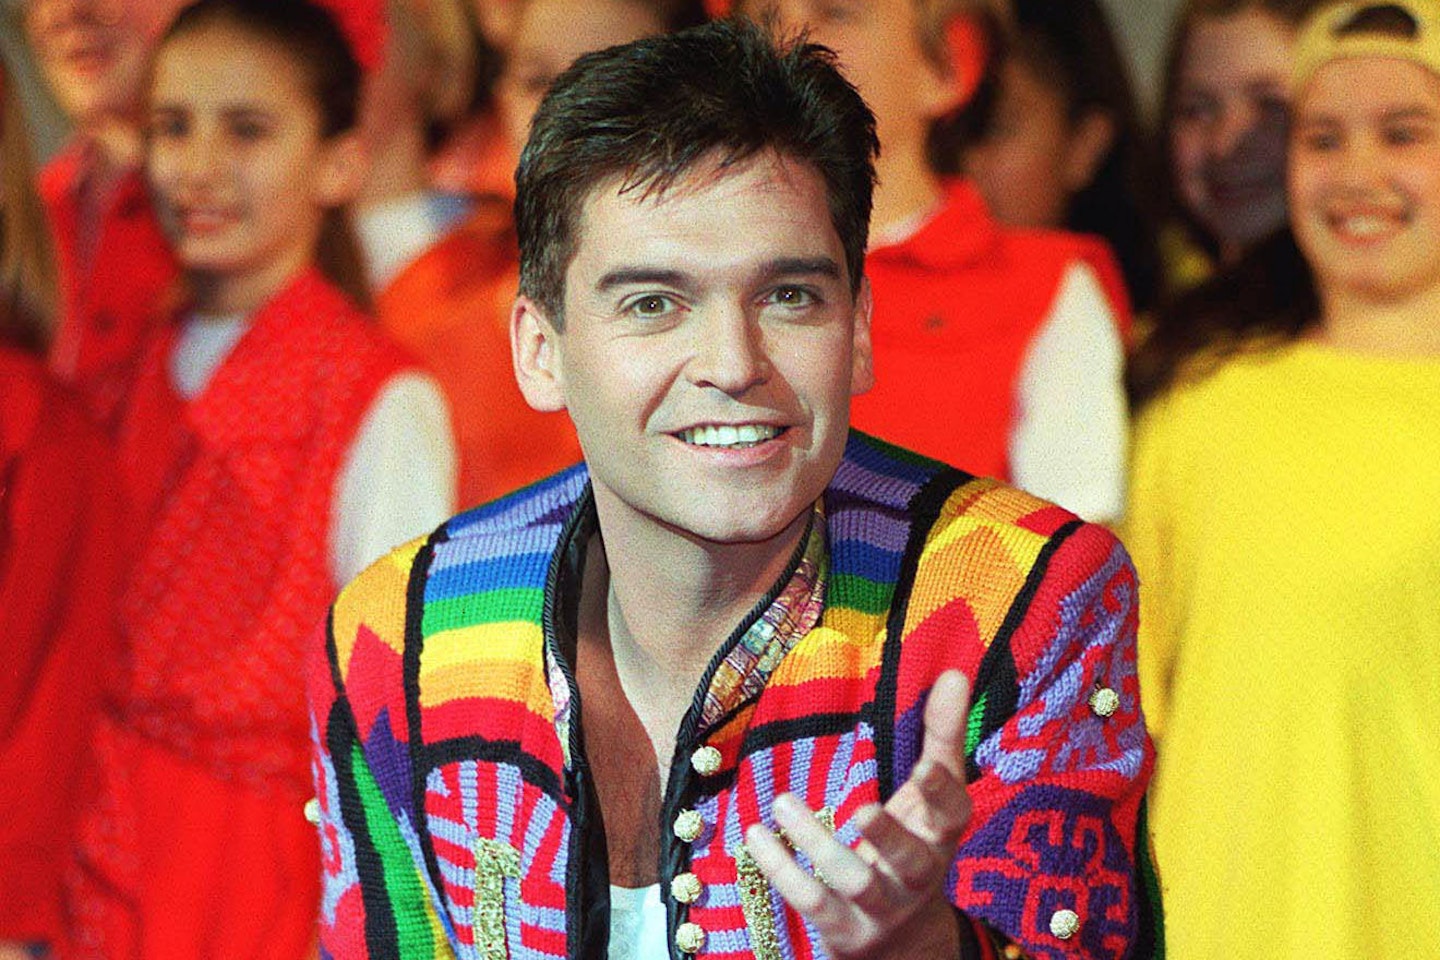 Phil as Joseph in 1996 © Getty Images